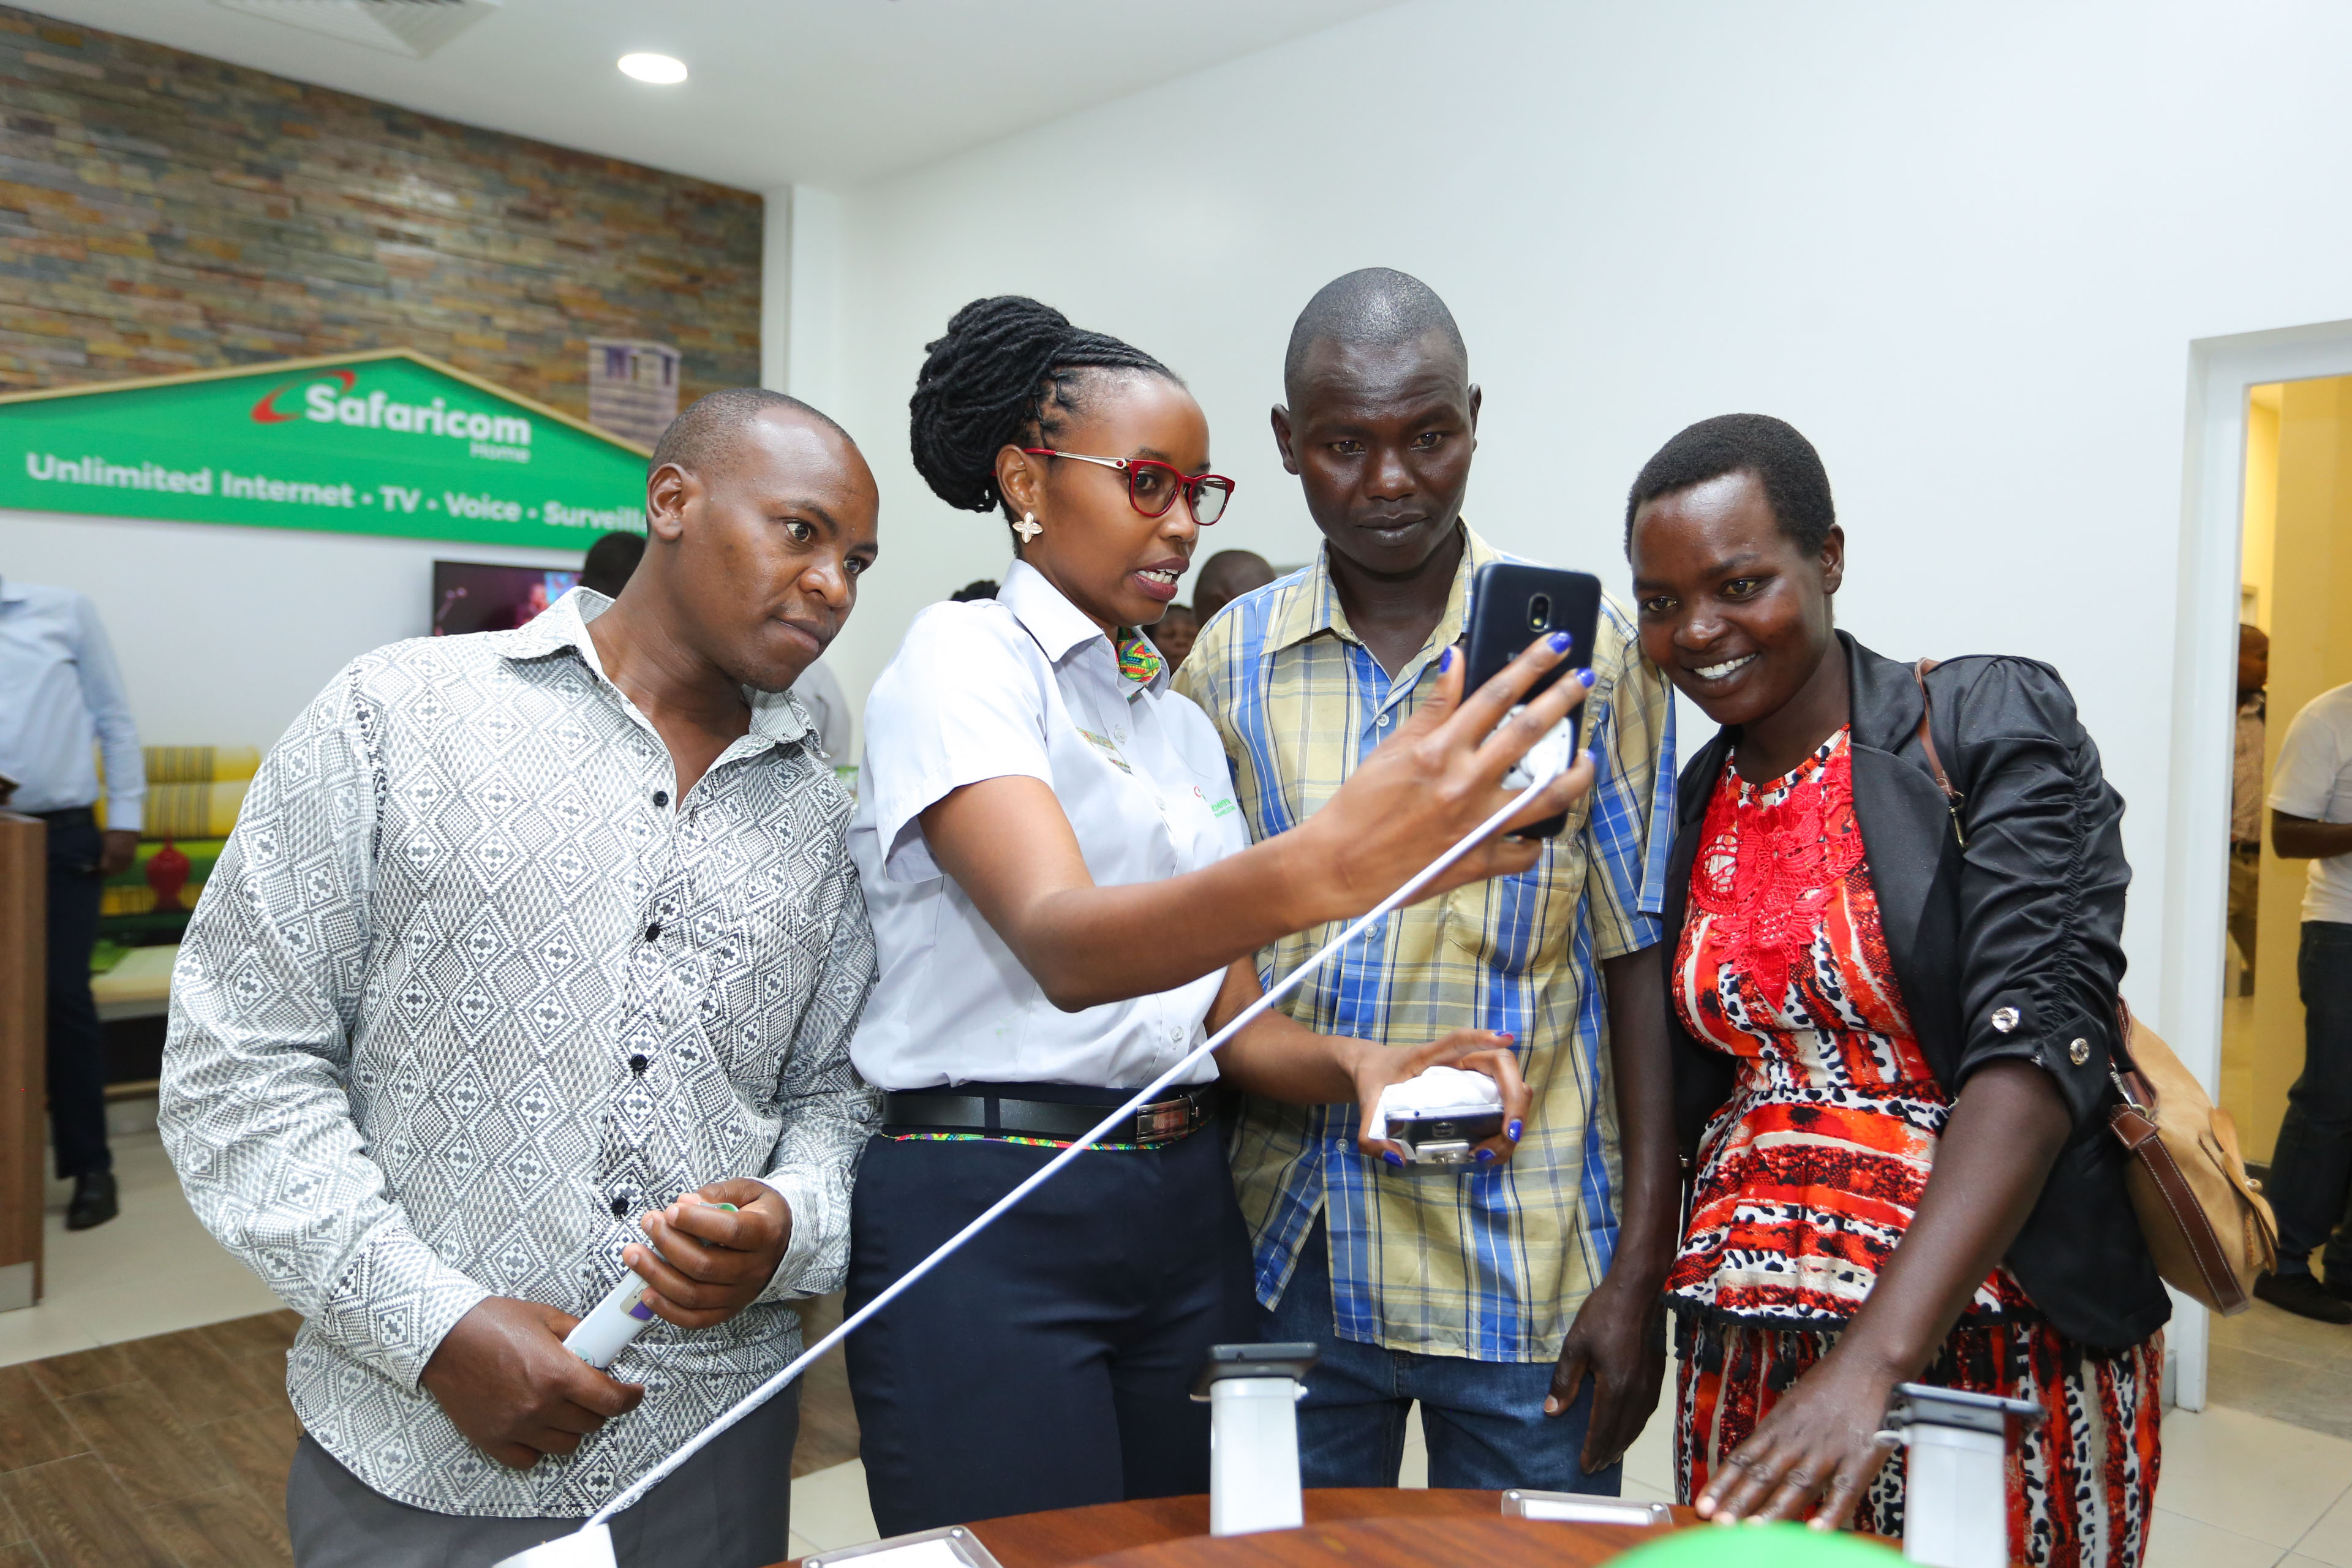 Safaricom Customer experience executive, Esther Ngendo (second left) explains to customers features of some new devices being sold at the newly opened Safaricom Westside Shop in Nakuru - Bizna